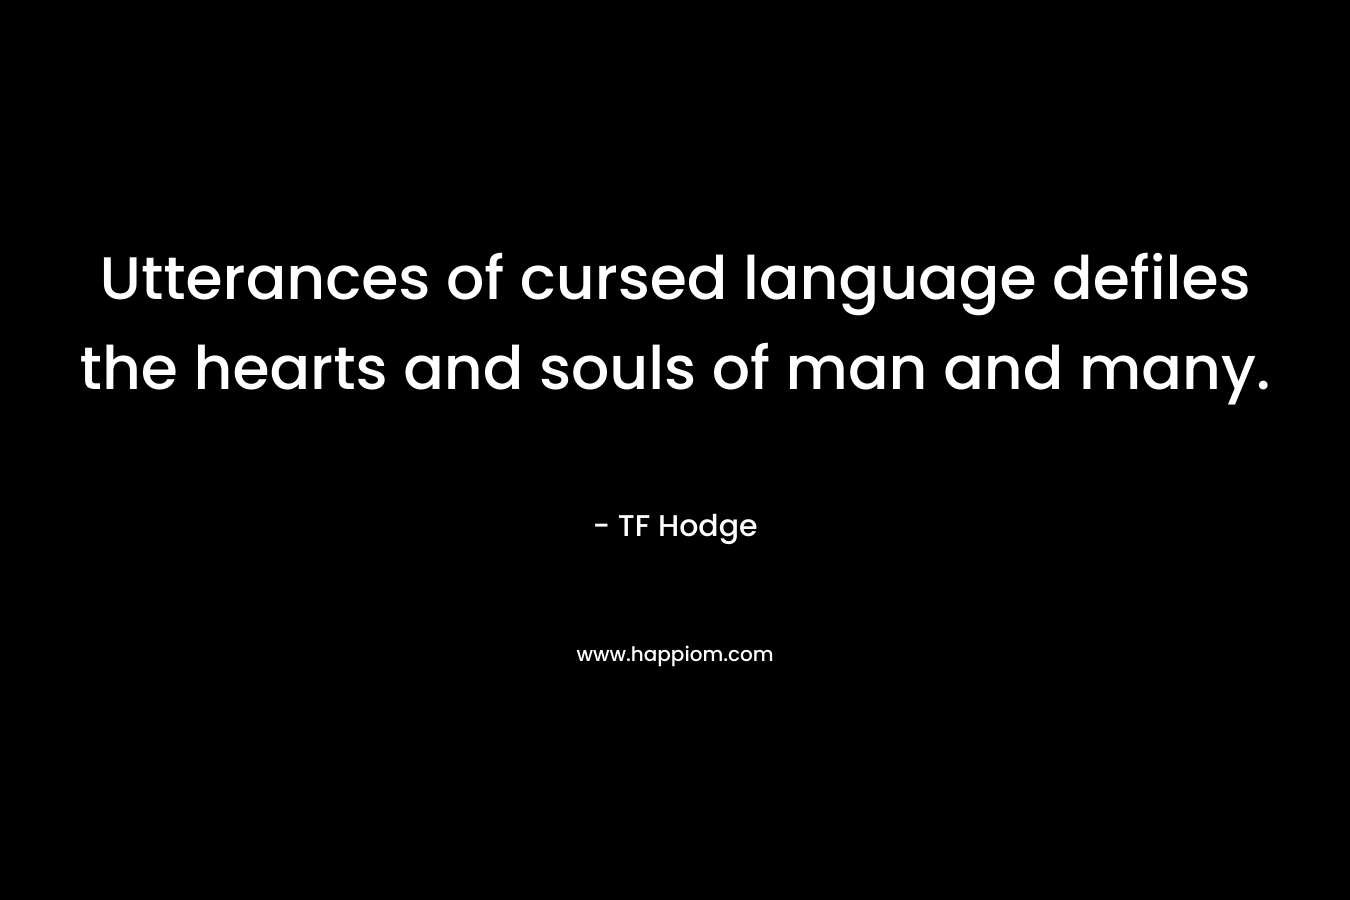 Utterances of cursed language defiles the hearts and souls of man and many.